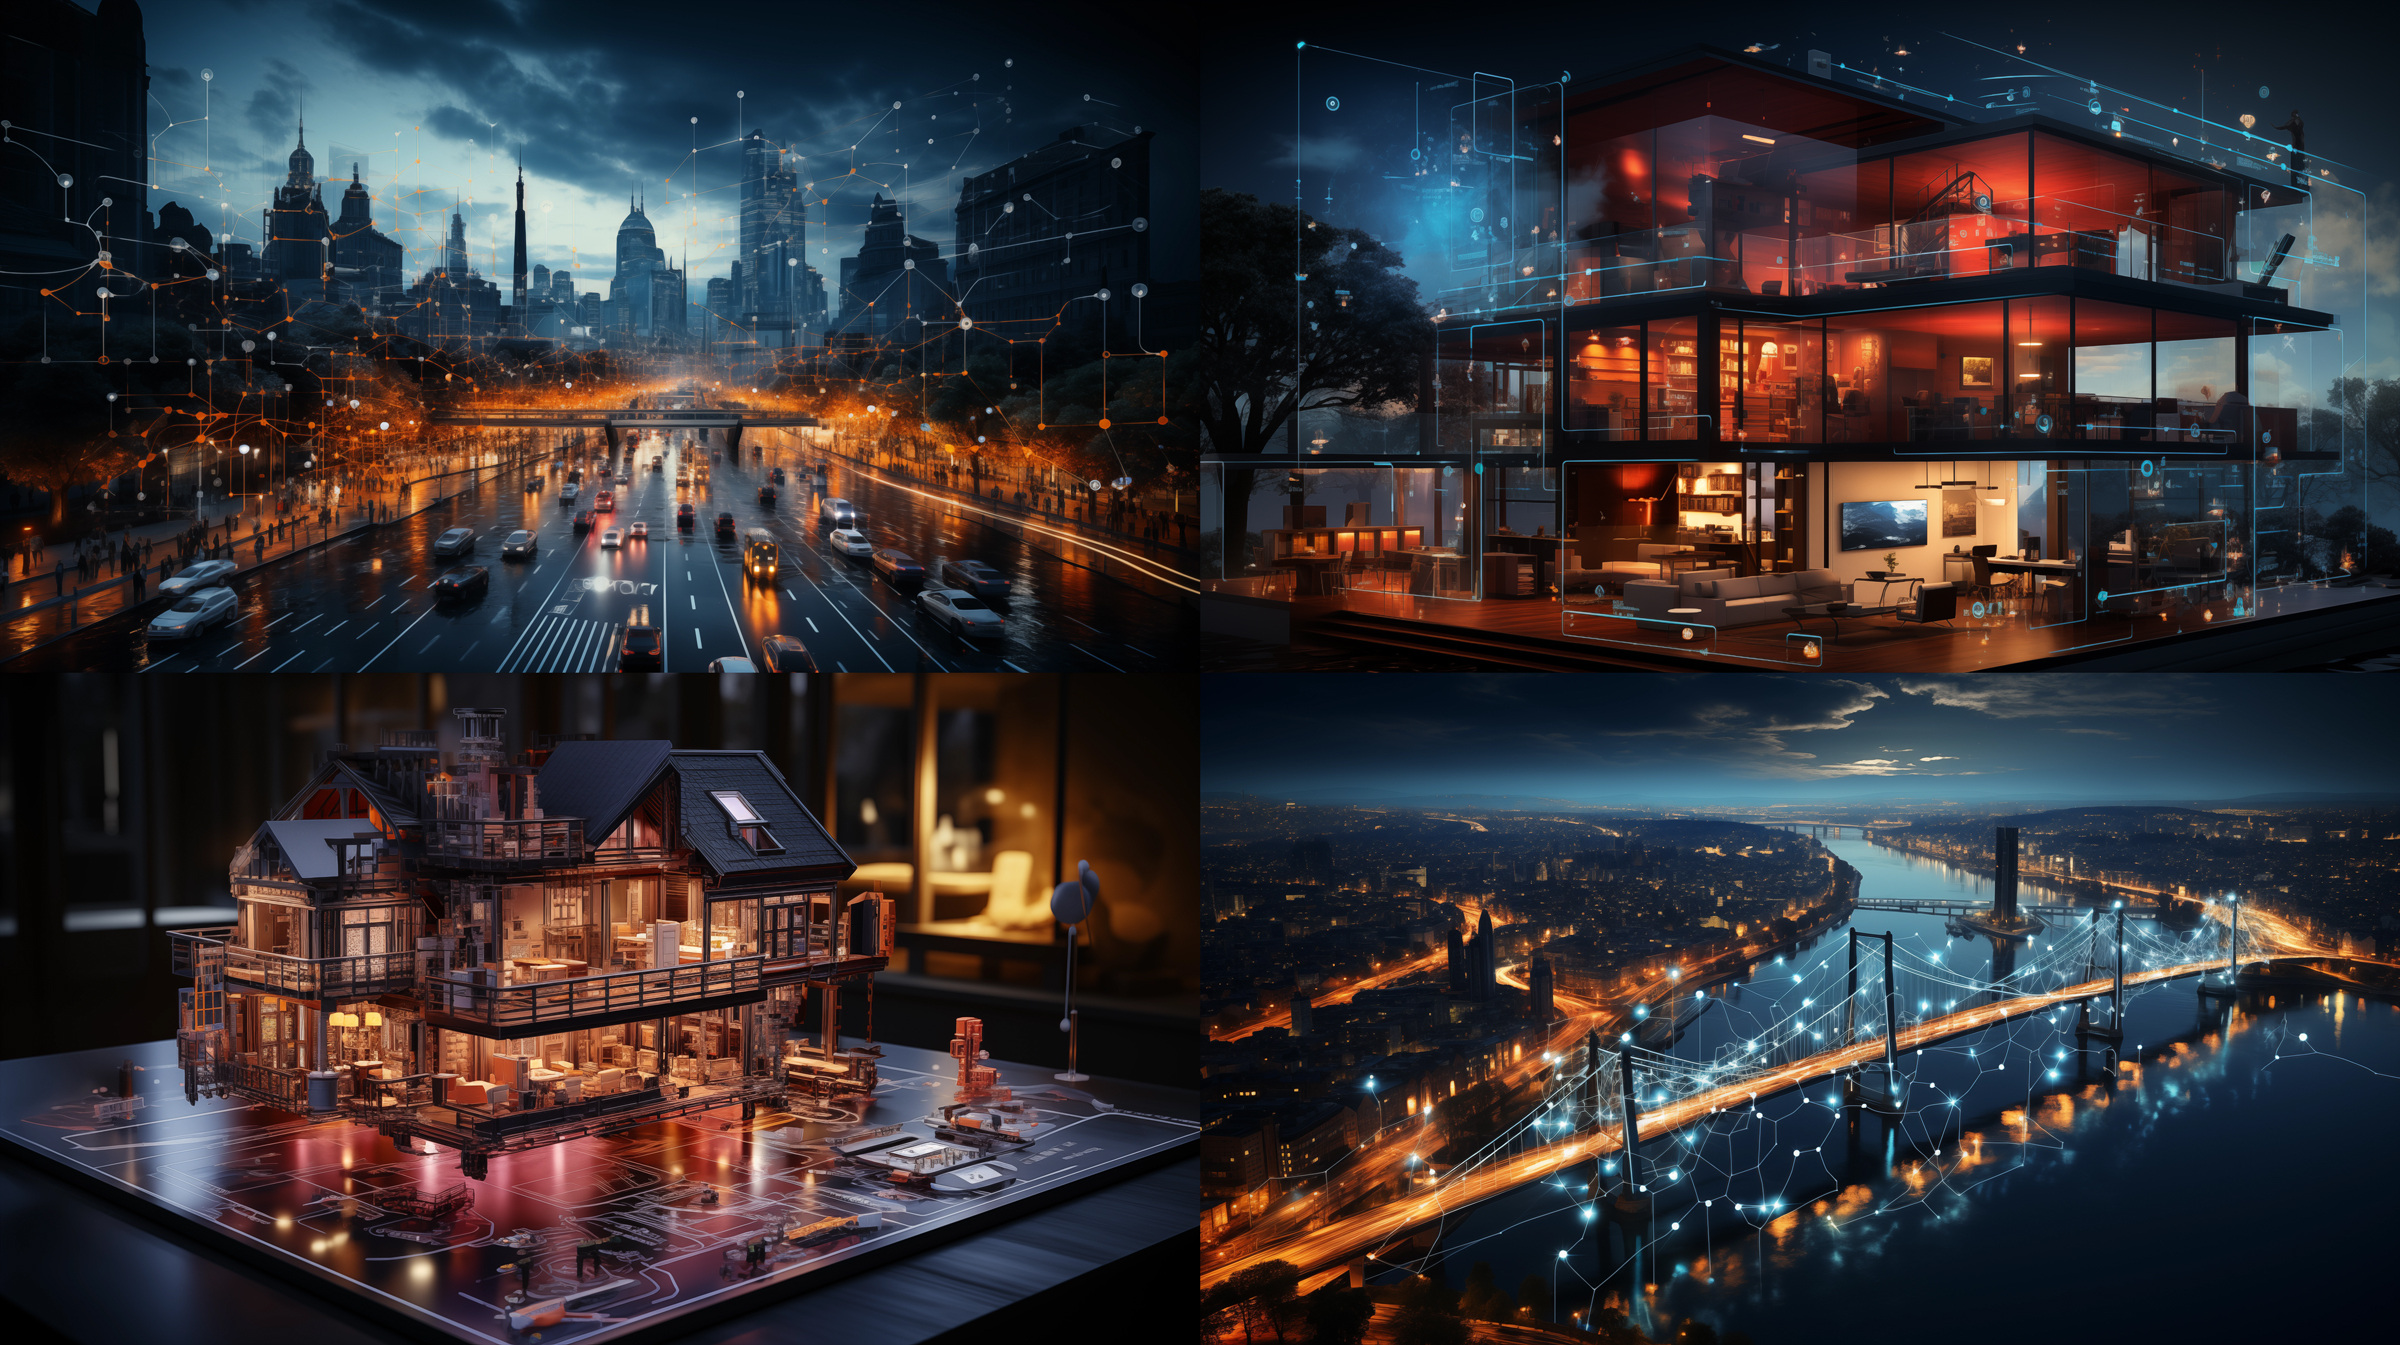 A collage of four images depicting the powerful features of AI in architecture and urban planning. The images illustrate traffic flow optimization, sustainable building design, predictive maintenance analysis, and hyper-personalized public space design.